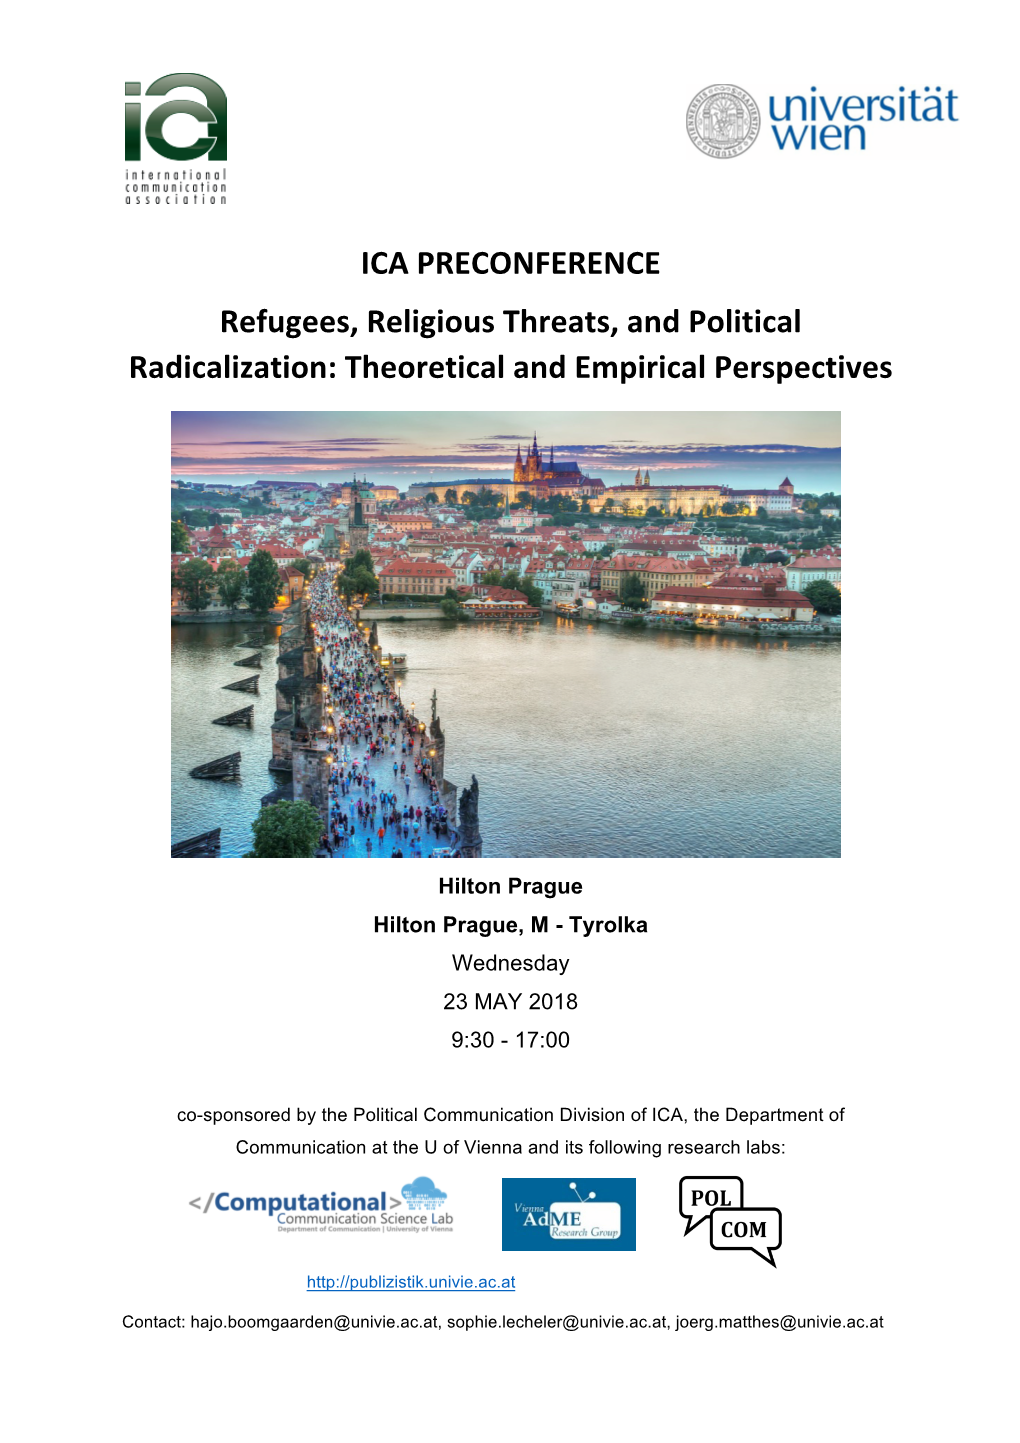 ICA PRECONFERENCE Refugees, Religious Threats, and Political Radicalization: Theoretical and Empirical Perspectives